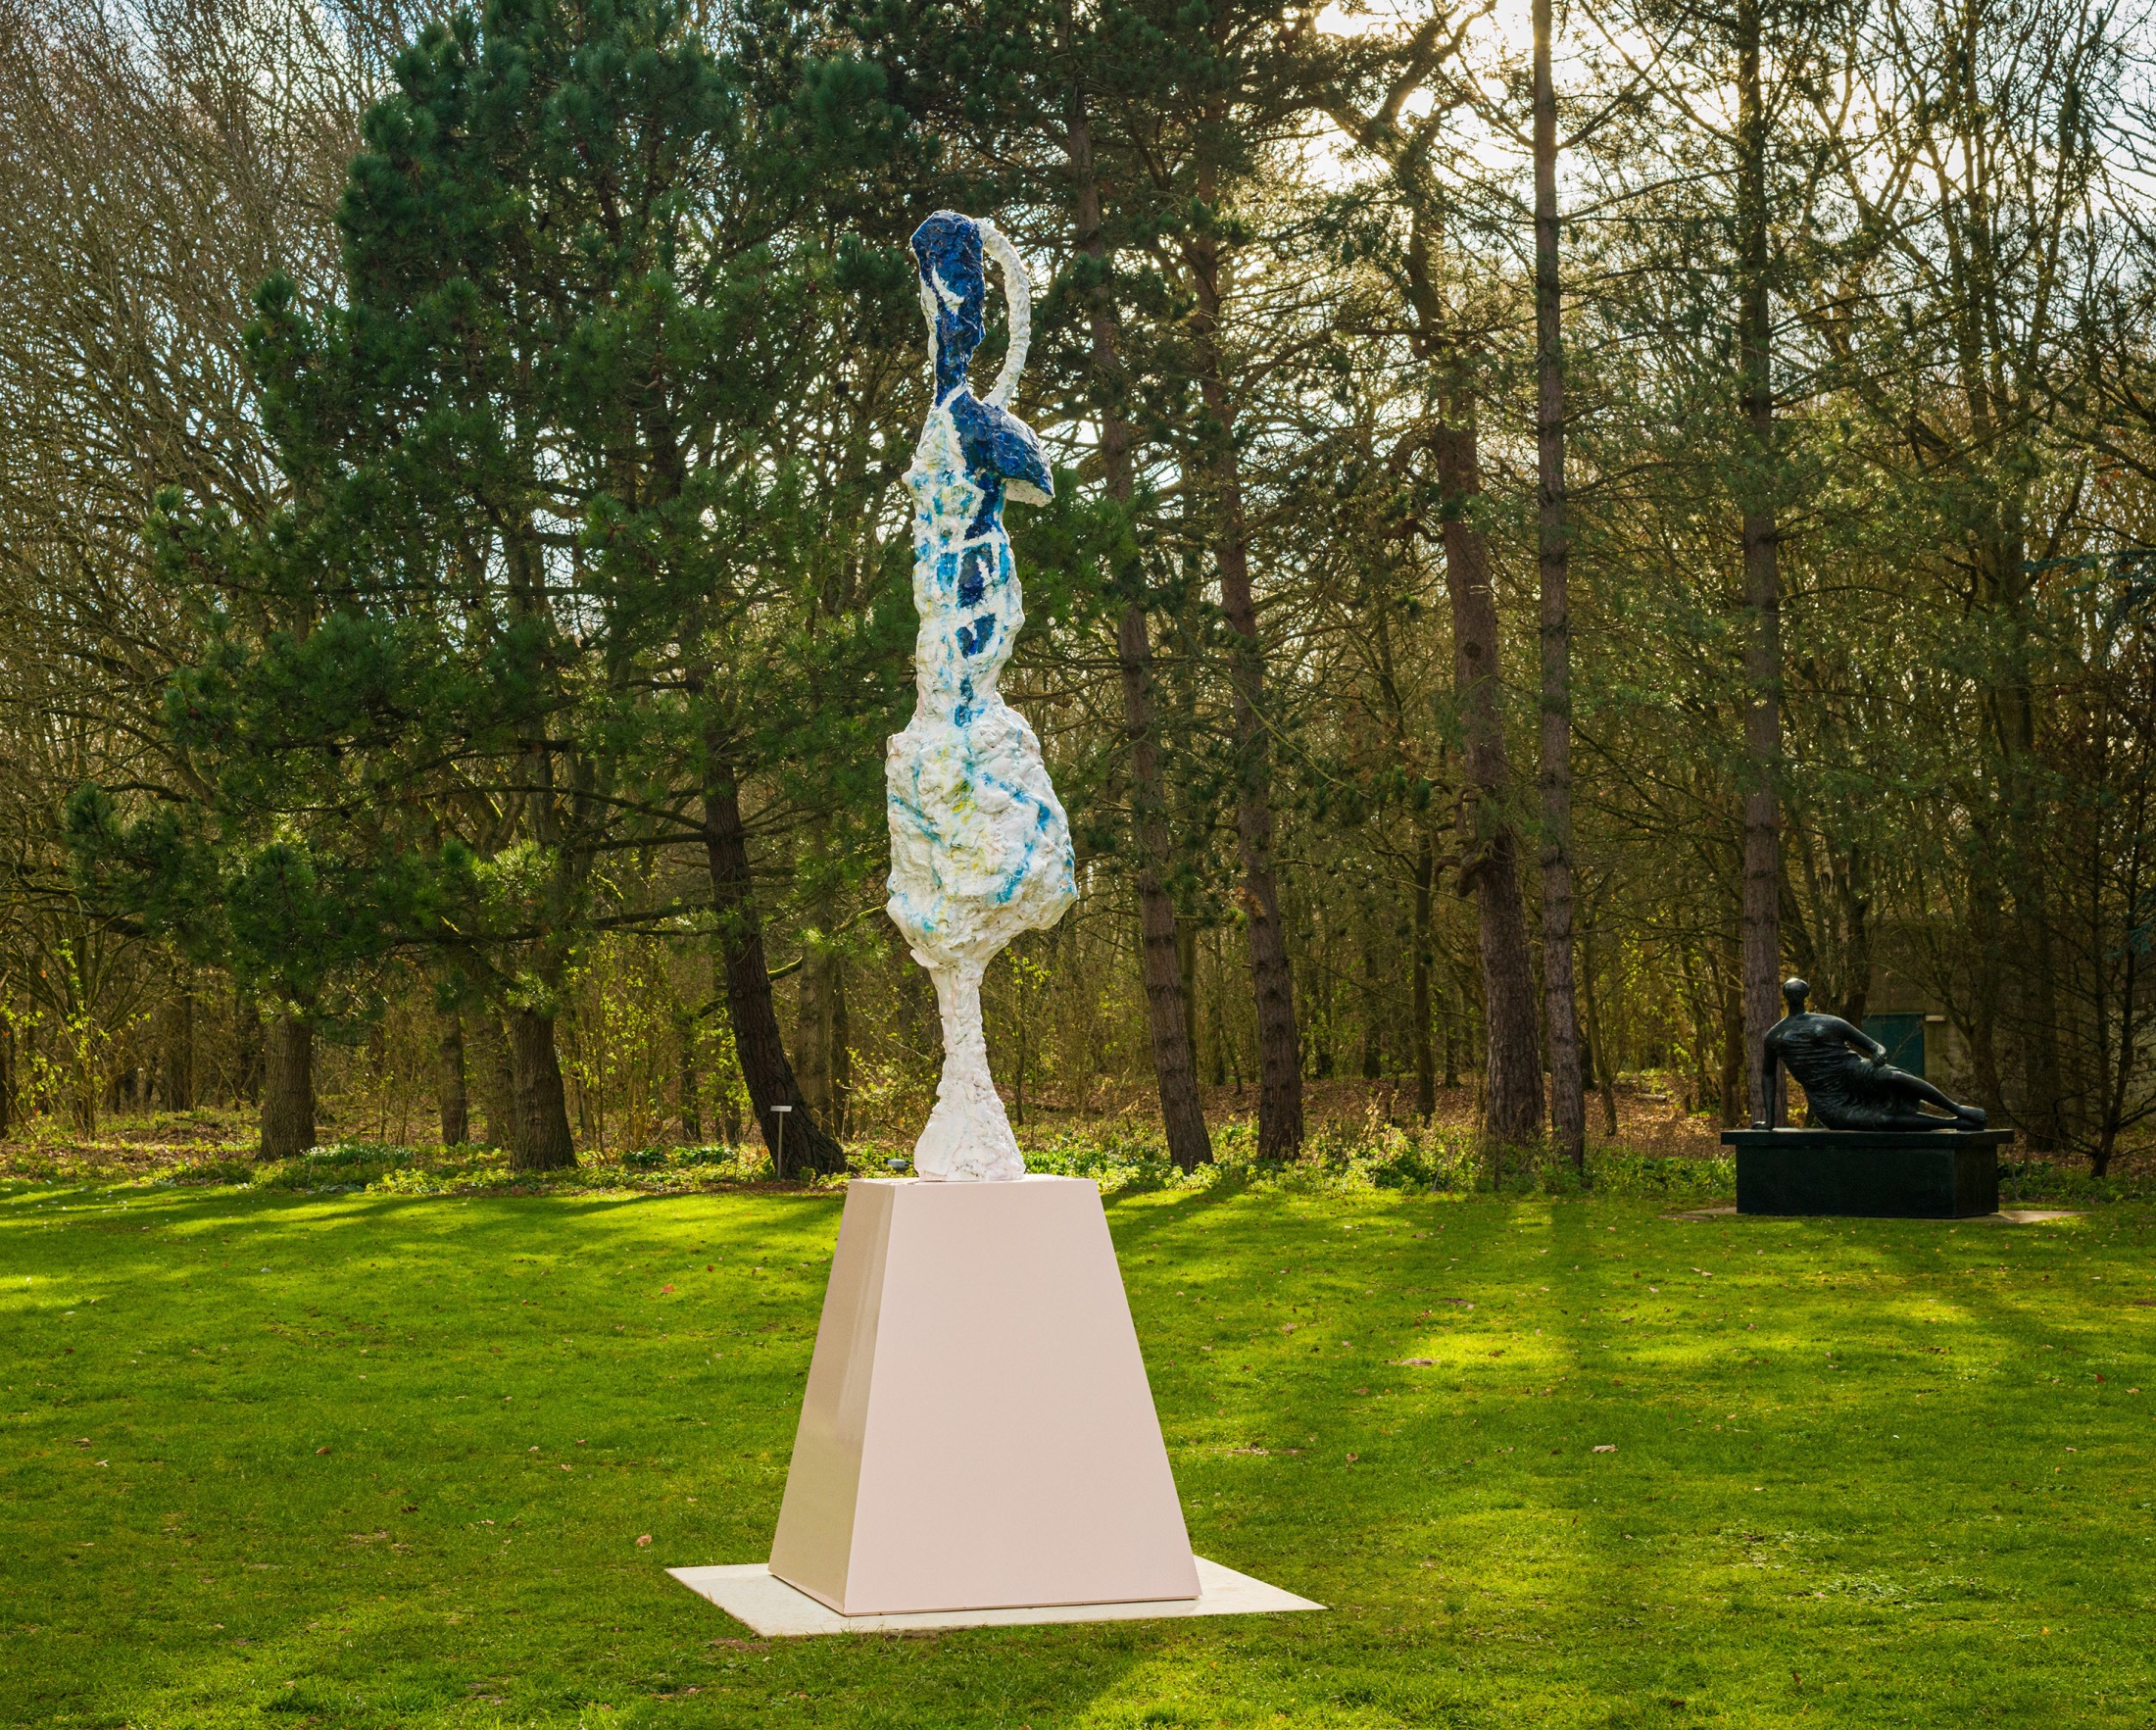 Installation view: Rebecca Warren, Jean, 2017, Sainsbury Centre, Norwich, 2023. Photo by Andy Crouch, courtesy of the Sainsbury Centre, University of East Anglia